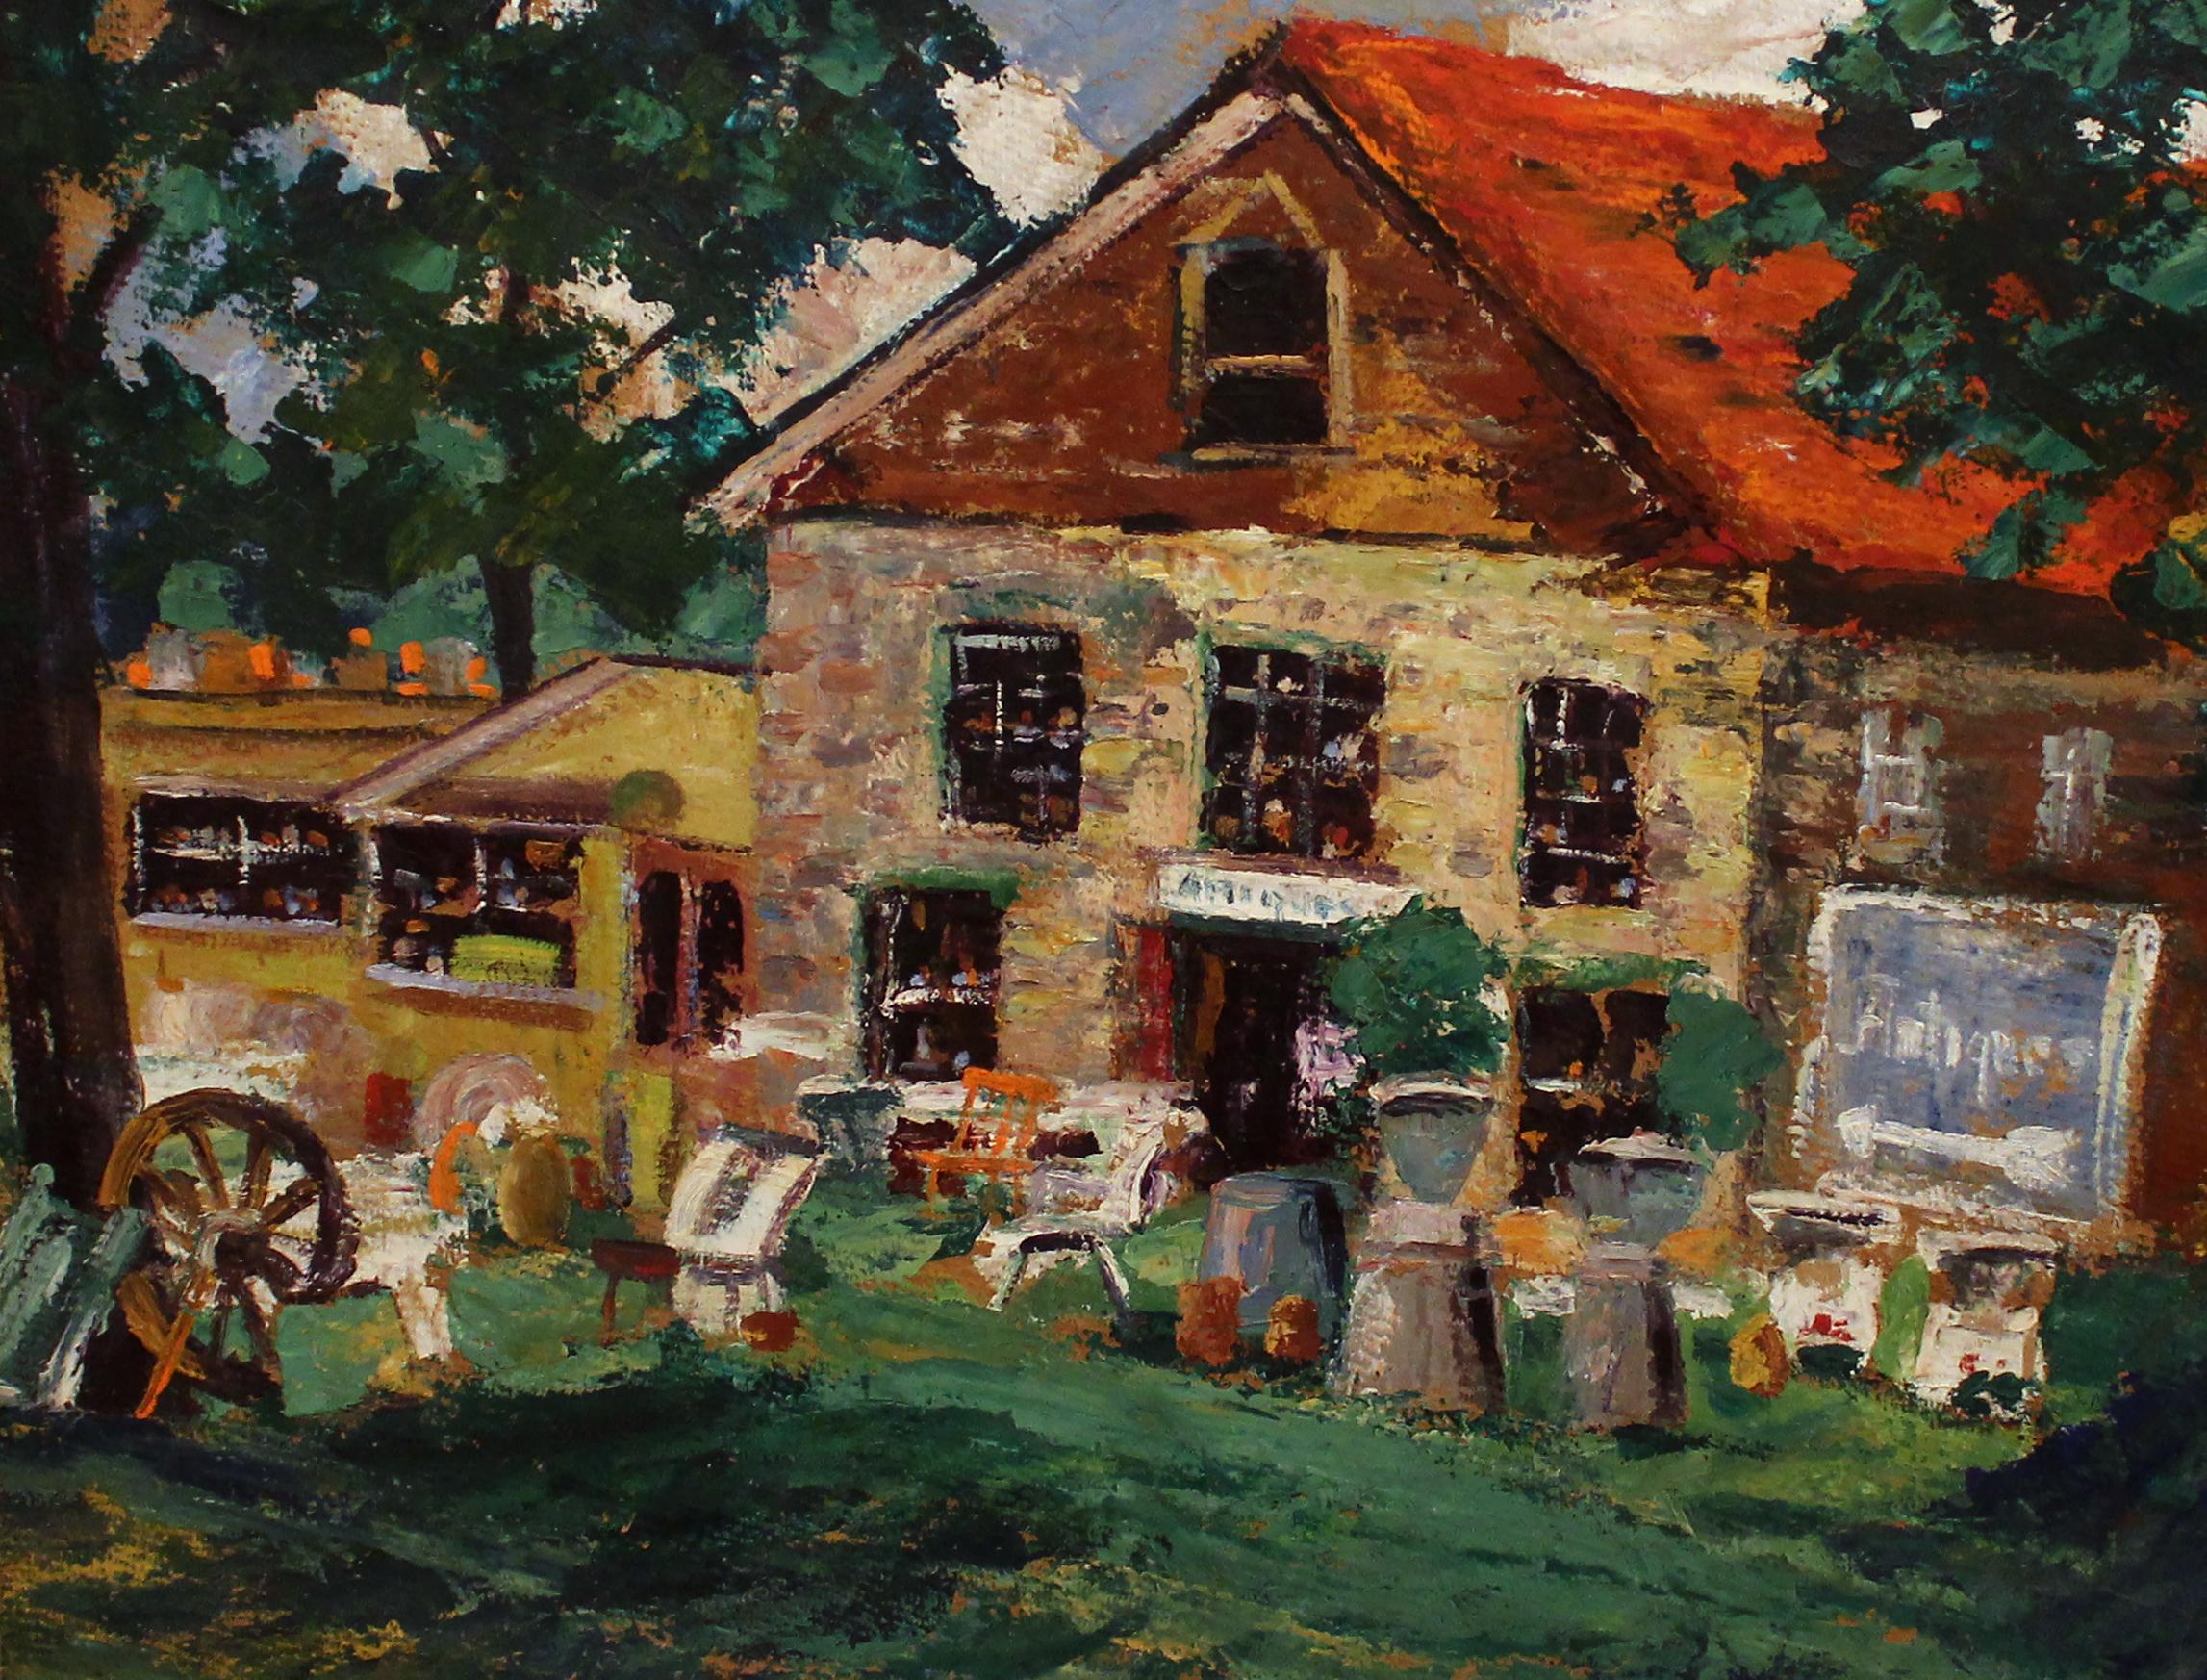 The Antique Store - Painting by Unknown